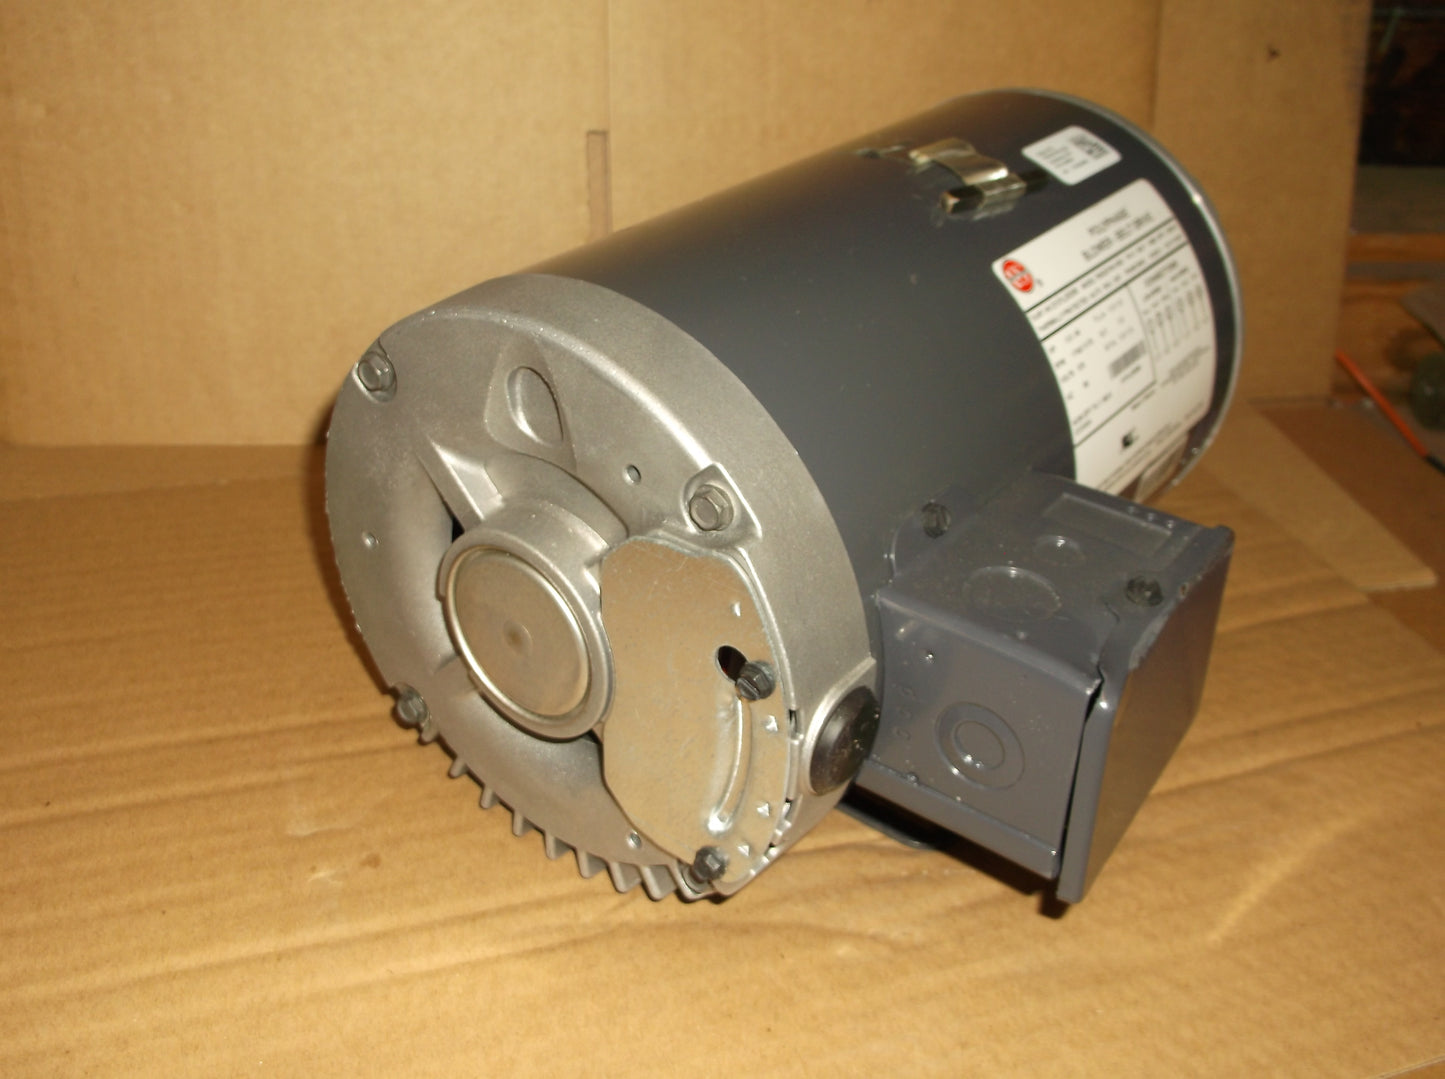 1HP POLYPHASE BELT DRIVE BLOWER MOTOR  575/60/3  RPM:1745-1170/2-SPEED